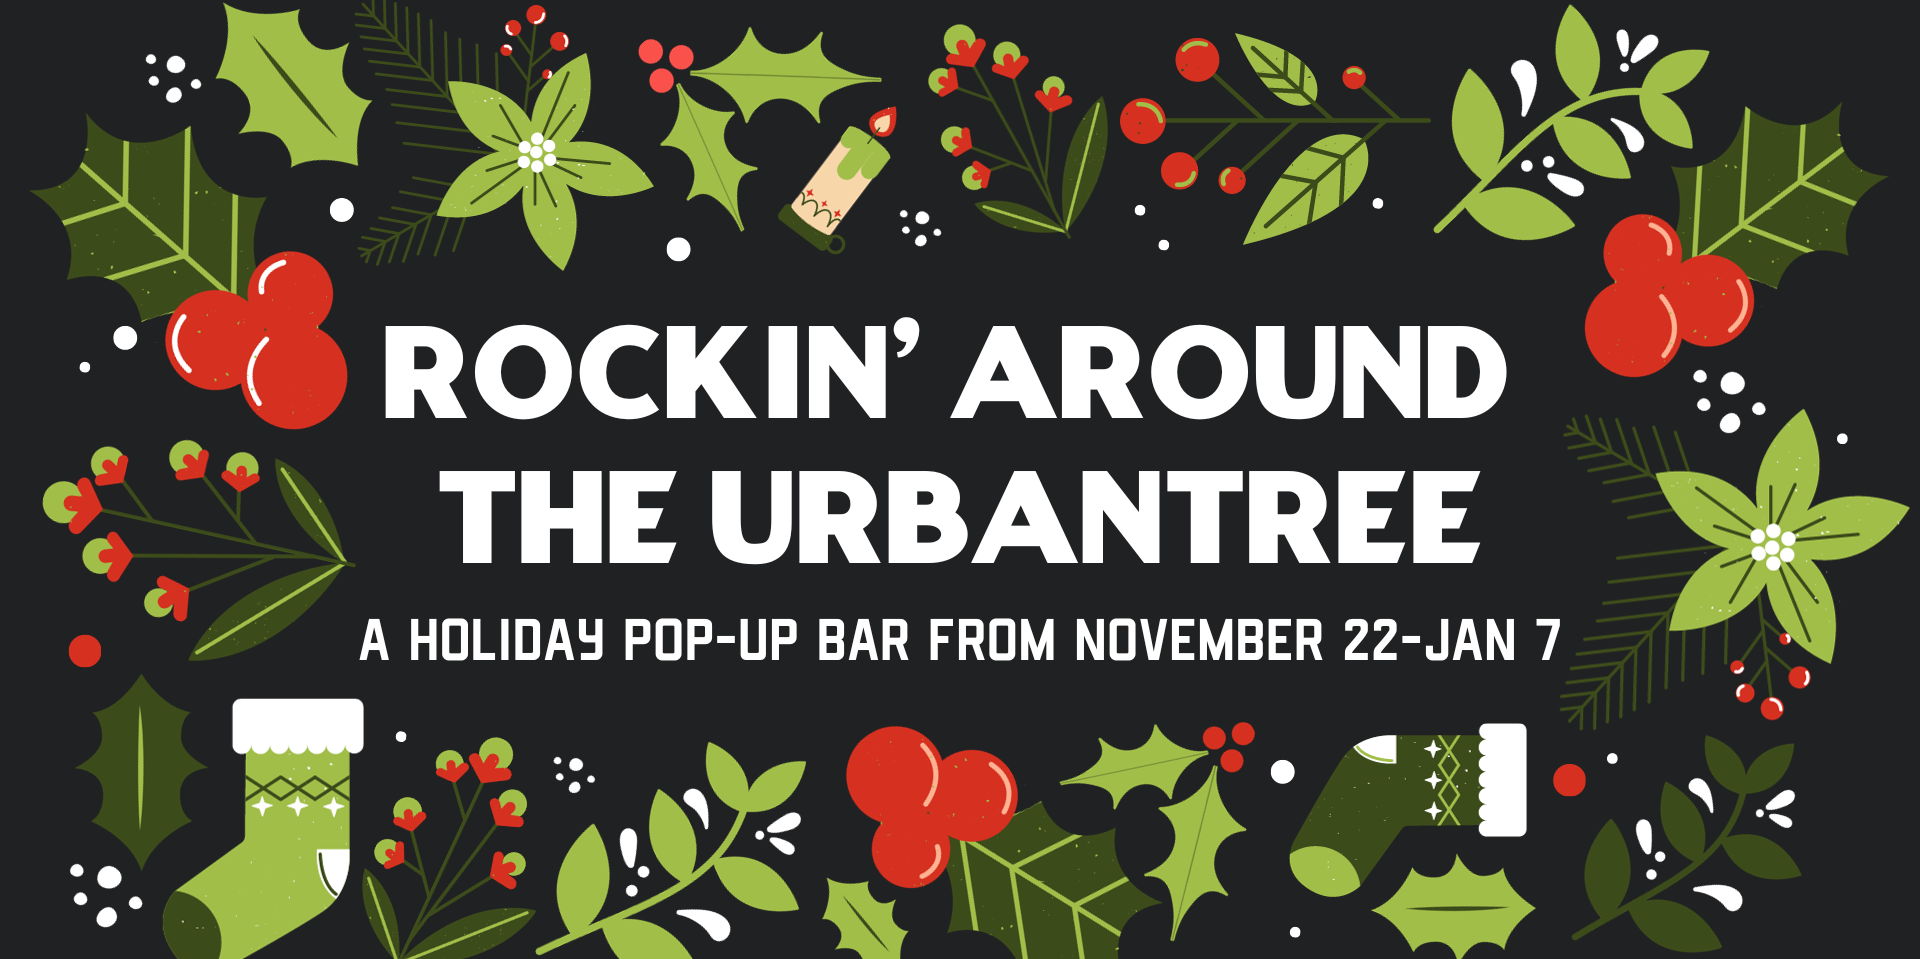 Rockin' Around the UrbanTree: A Holiday Pop-Up Bar promotional image